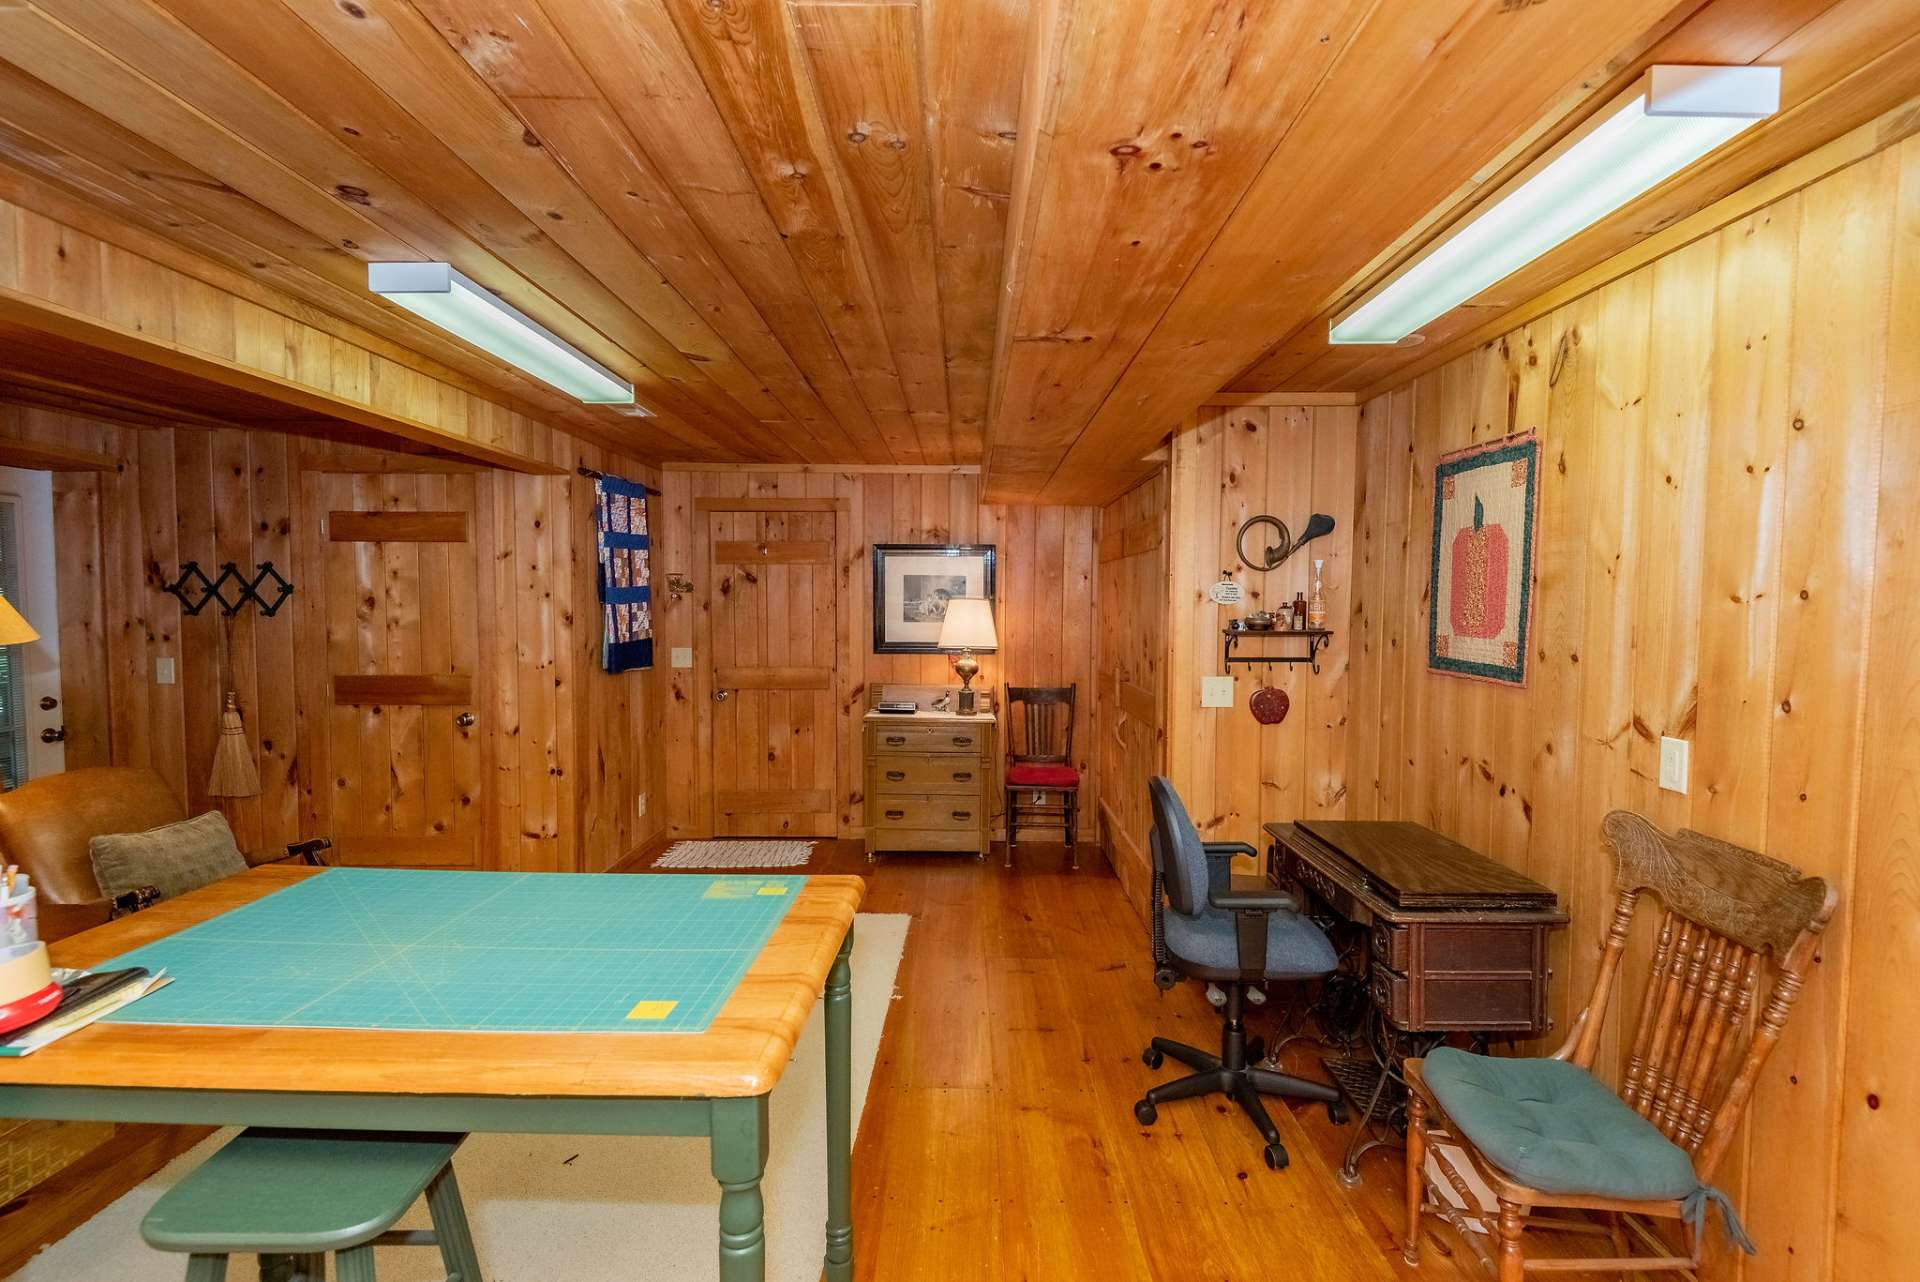 Lower level's bonus room is ideal for craft area, game room and extra sleeping area with easy access to lower deck.